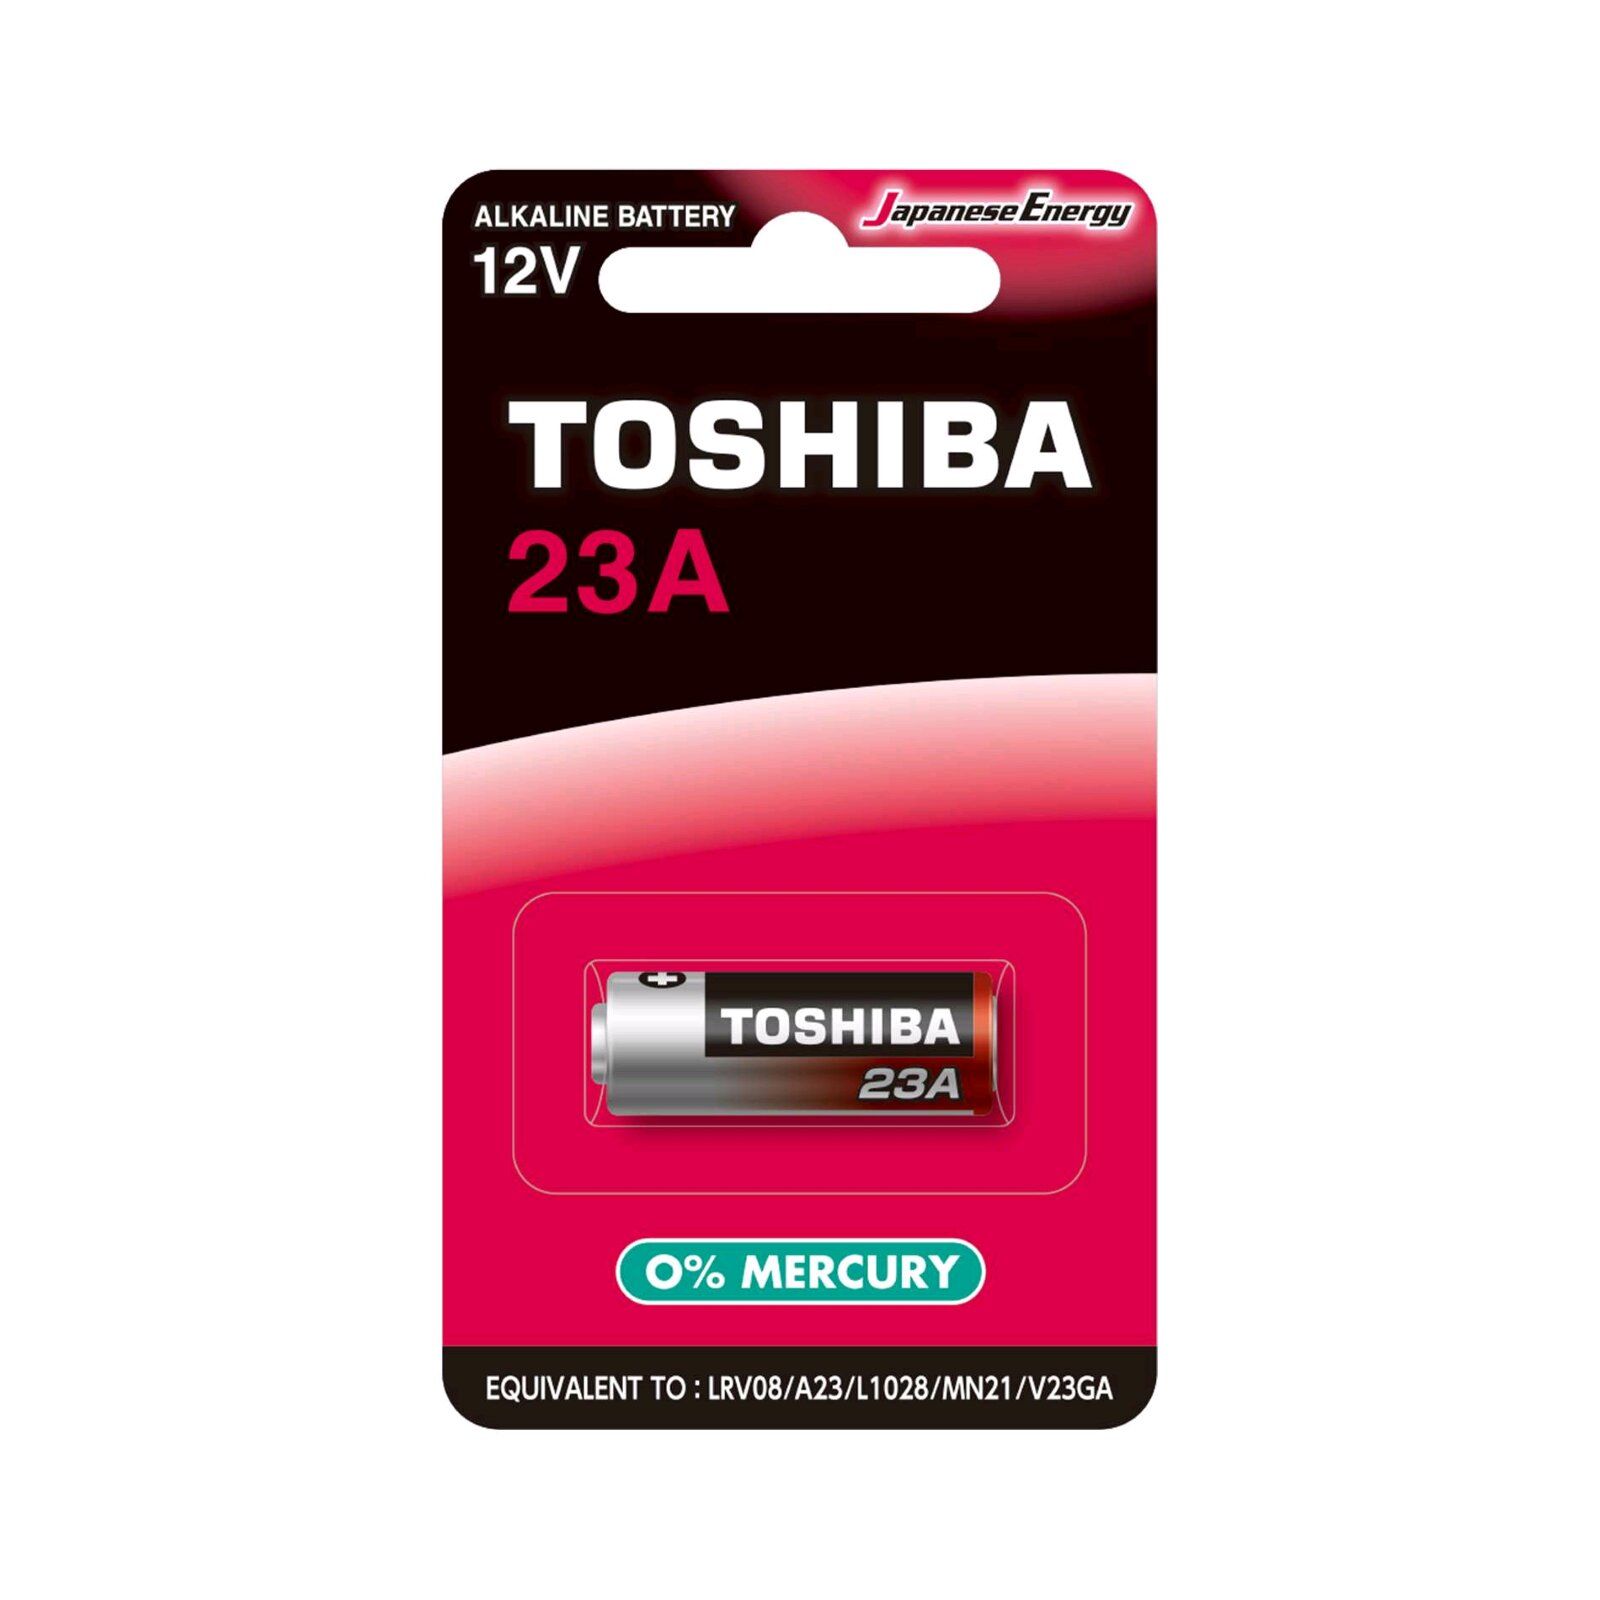 Toshiba Battery 23A - Pack of 1 (23A BP-1C) : photo 1